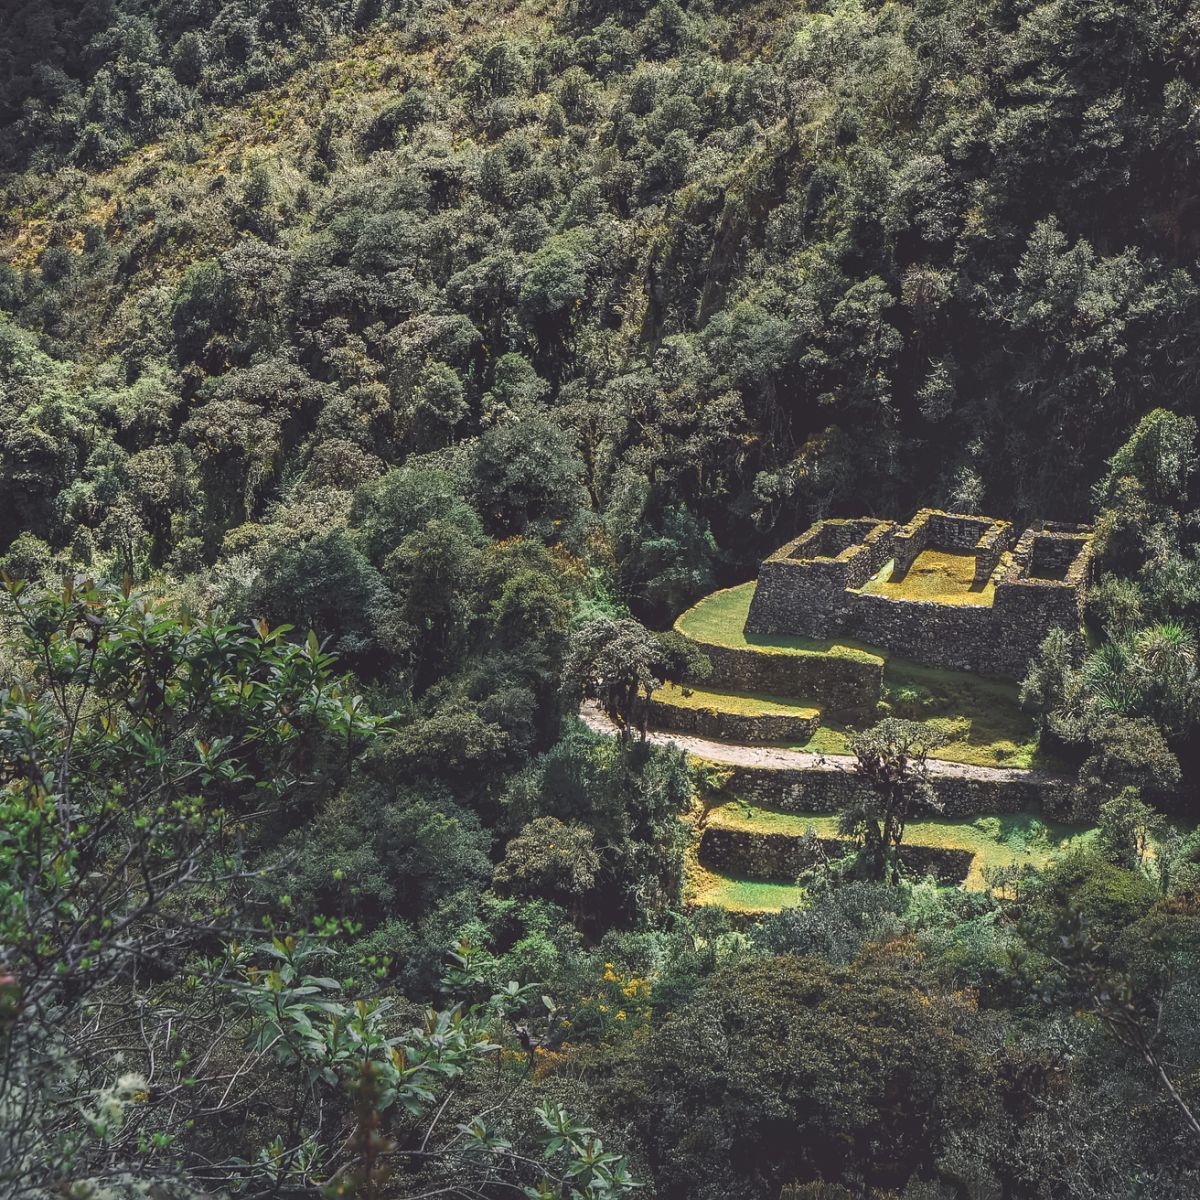 An ancient Inca ruin hidden in the forest, view from the Inca Trail (Peru)